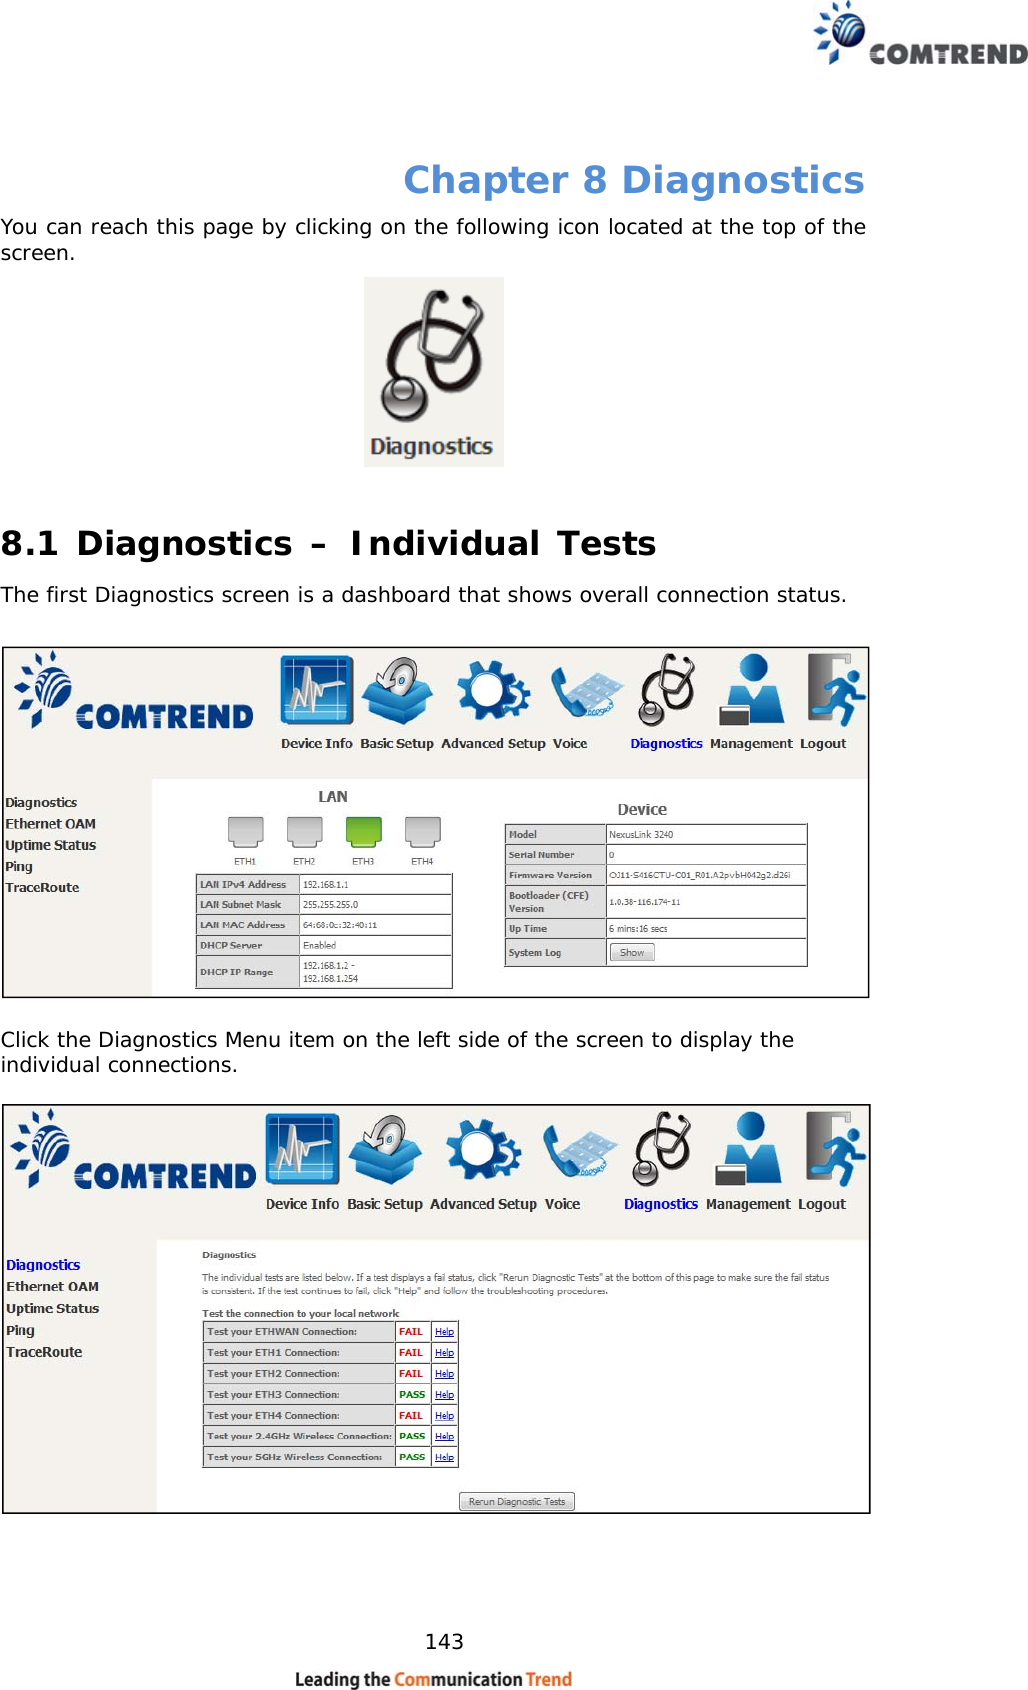    143 Chapter 8 Diagnostics You can reach this page by clicking on the following icon located at the top of the screen.  8.1 Diagnostics – Individual Tests The first Diagnostics screen is a dashboard that shows overall connection status.     Click the Diagnostics Menu item on the left side of the screen to display the individual connections.     